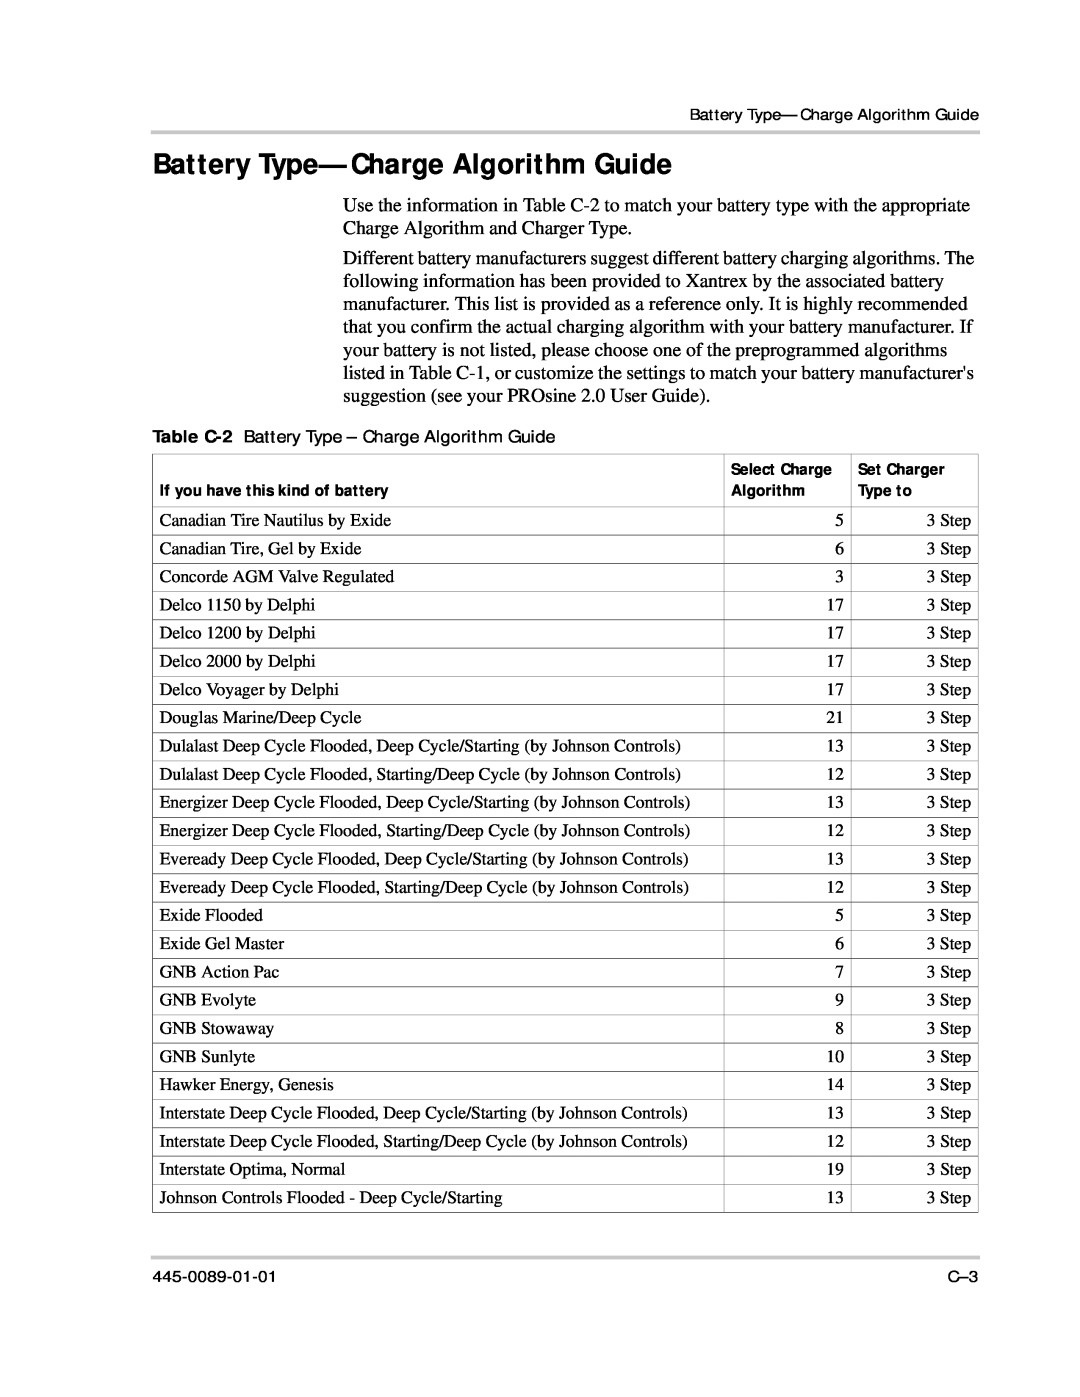 Xantrex Technology PROsine 2.0 Battery Type-Charge Algorithm Guide, Table C-2 Battery Type - Charge Algorithm Guide 